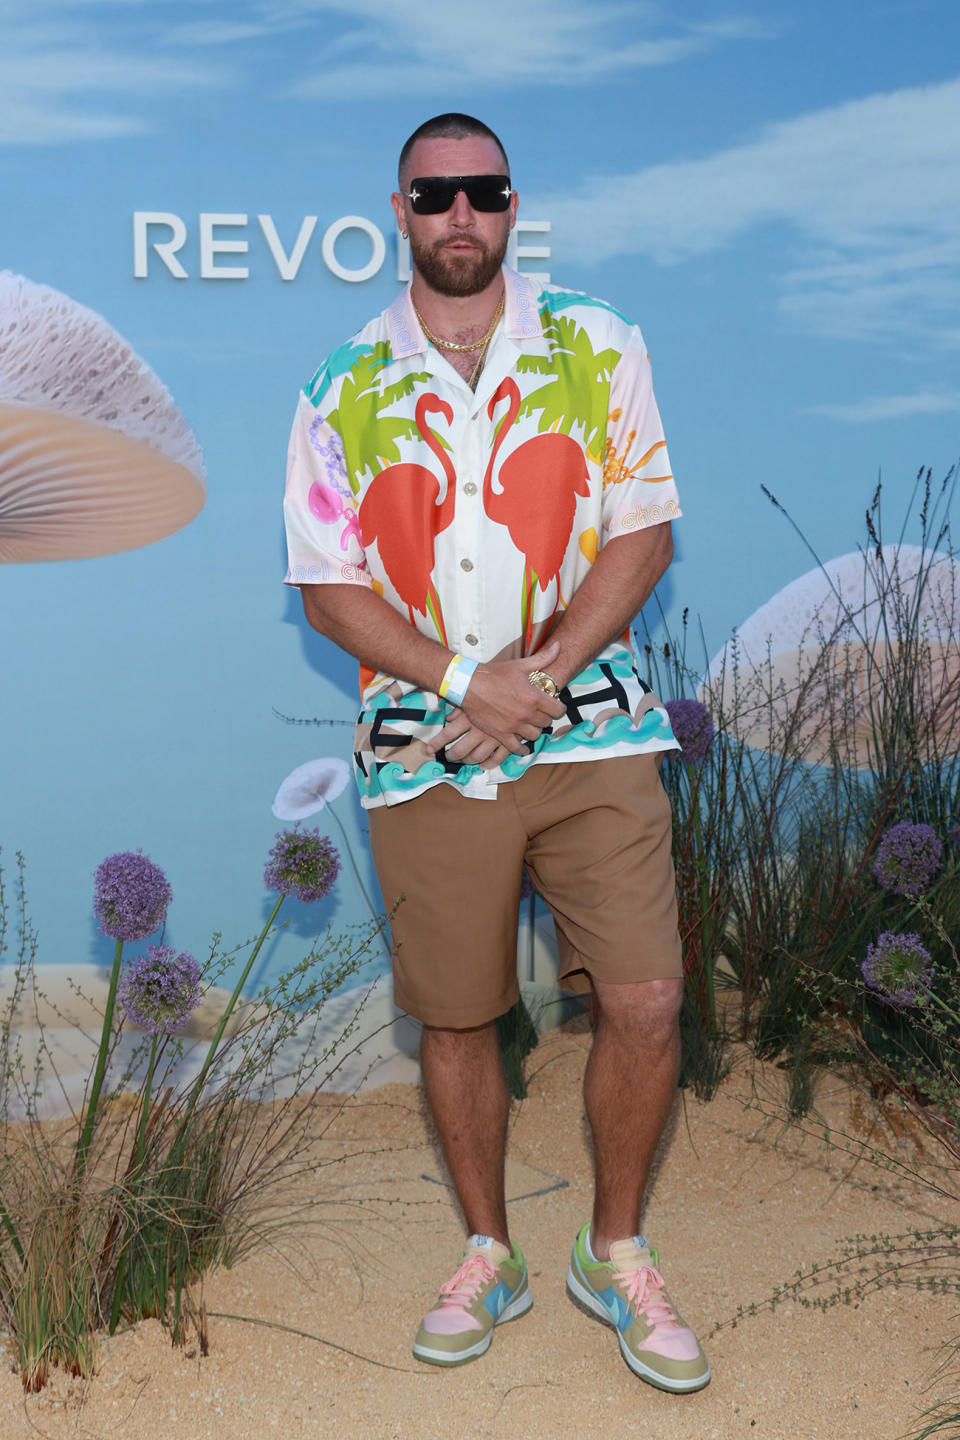 THERMAL, CALIFORNIA - APRIL 15: Travis Kelce attends the 2023 REVOLVE Festival on April 15, 2023 in Thermal, California. (Photo by Steven Simione/Getty Images)